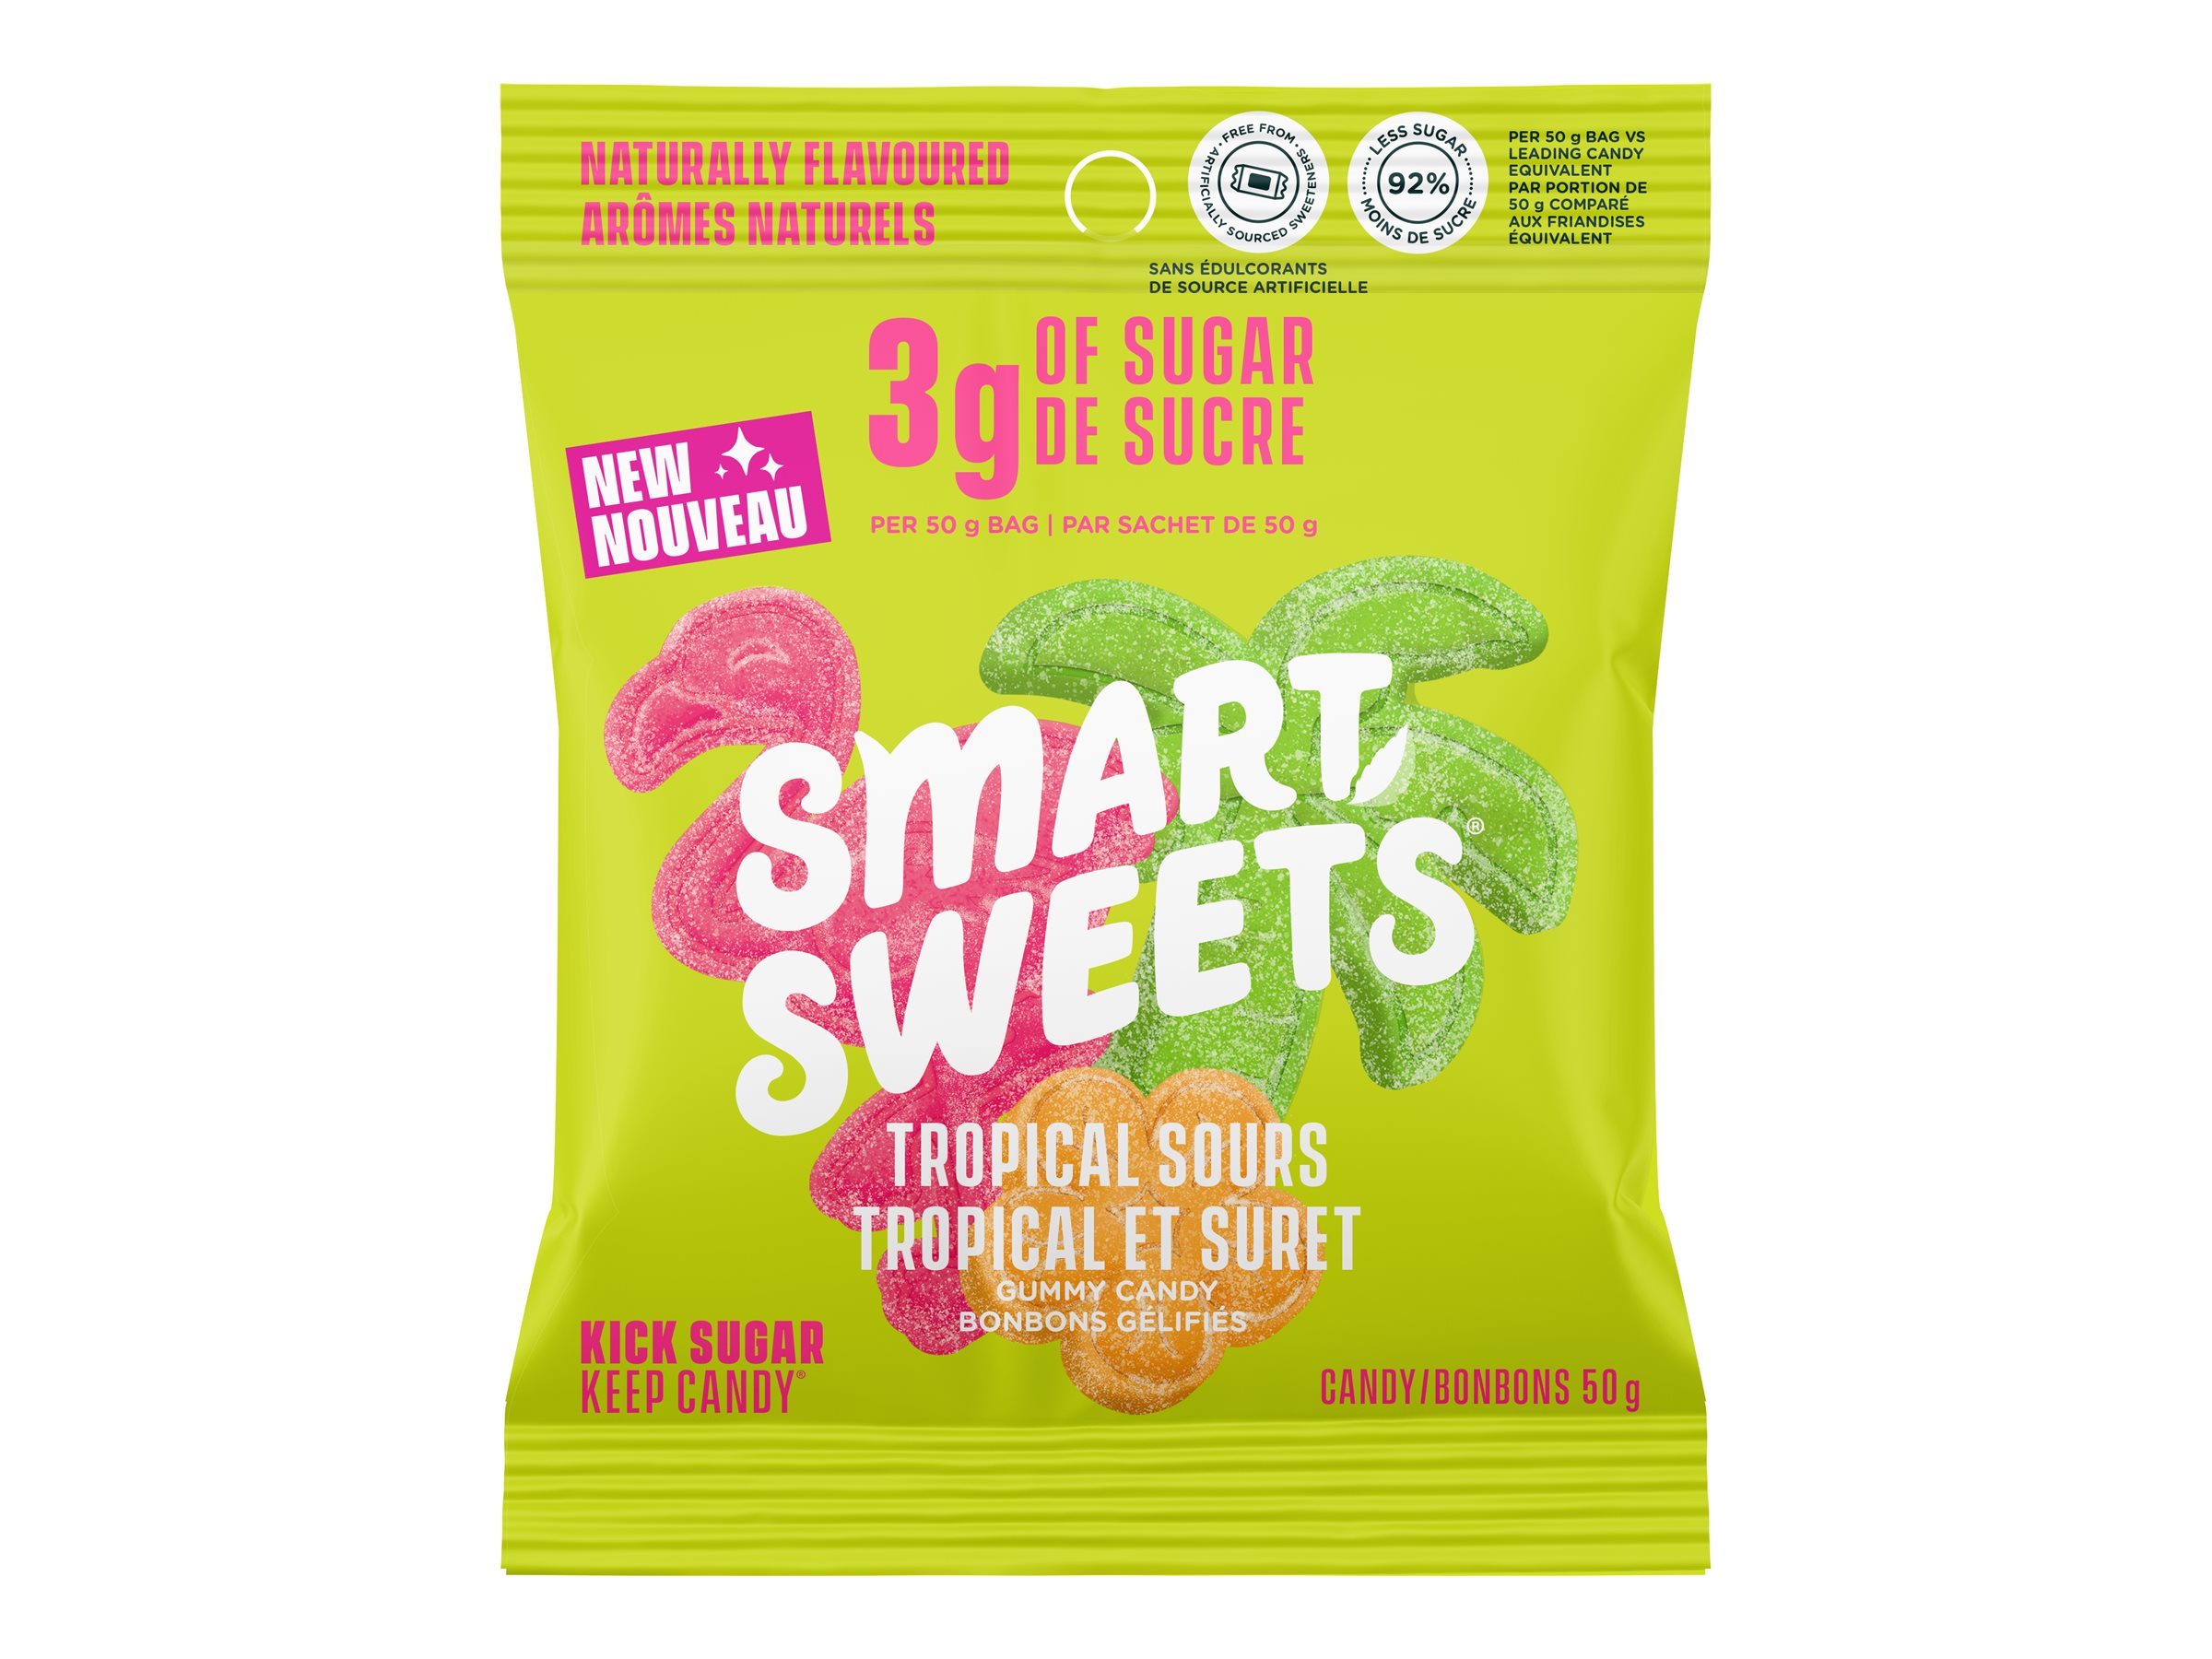 SmartSweets Gummy Candy - Tropical Sours - 50g